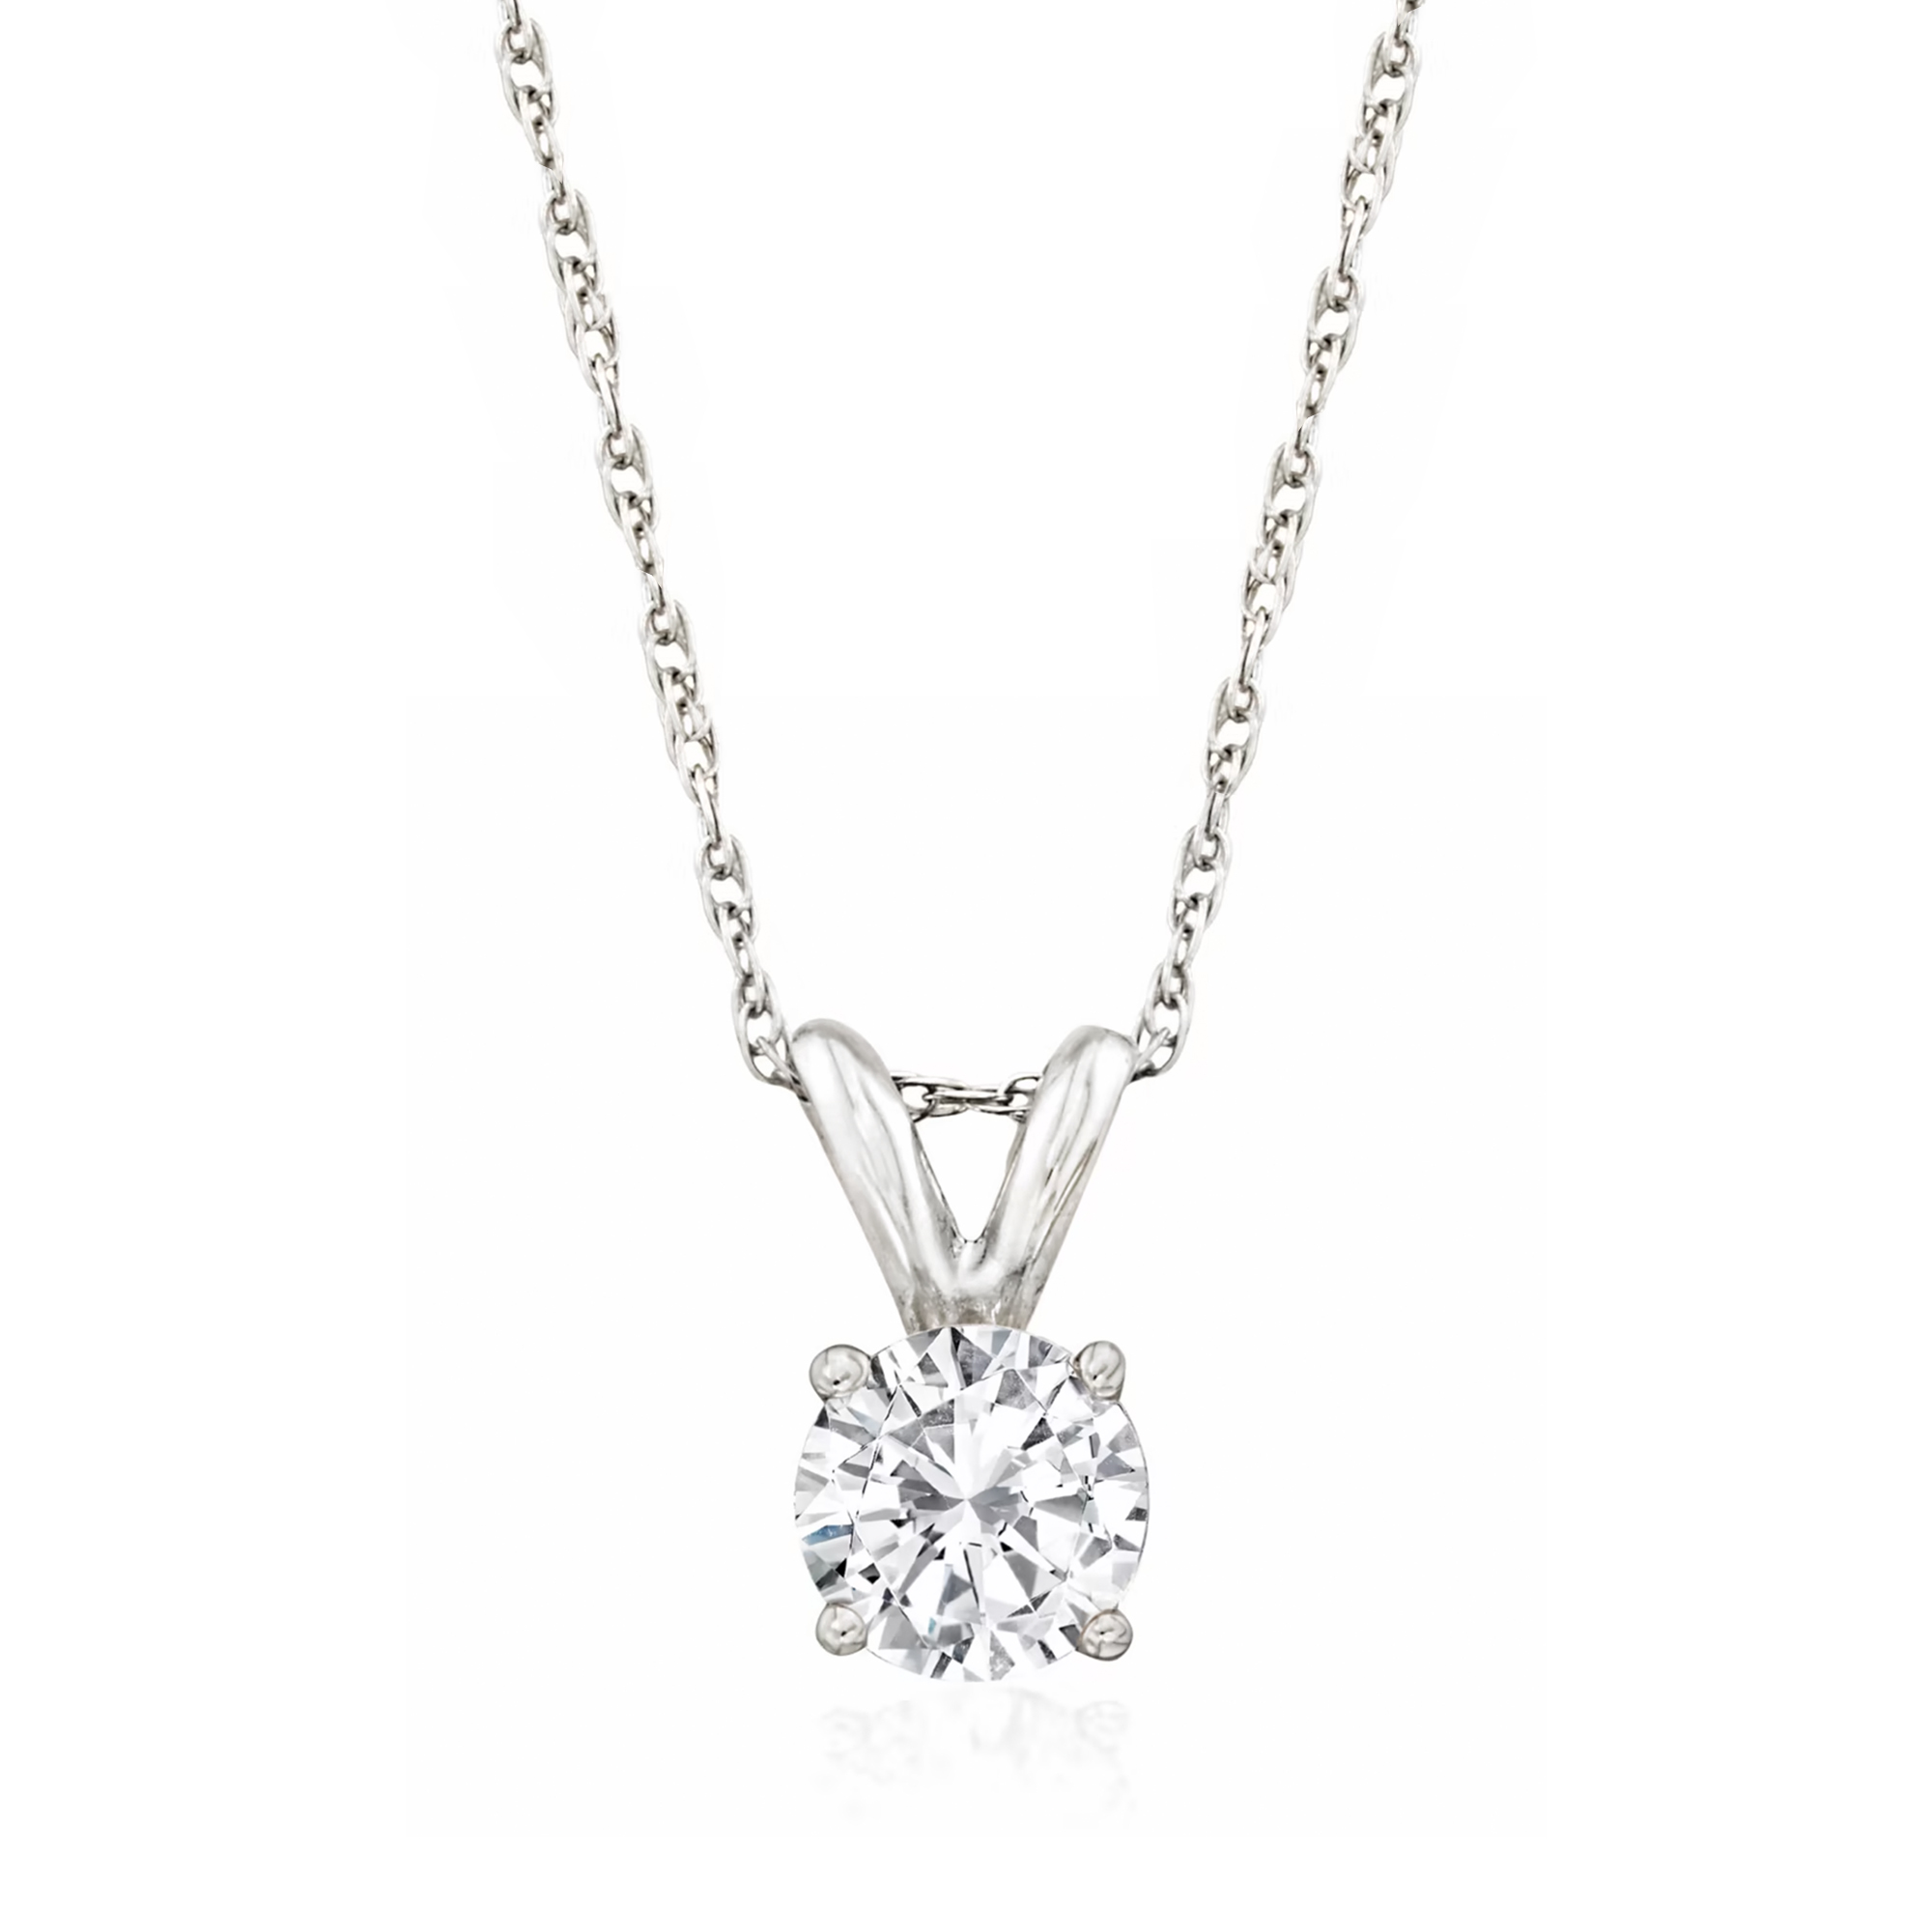 Diamond solitaire 1/2k necklace on a 14k gold chain. Moms gift for me ❤️  love the size. Swipe to see how it looks when worn! : r/Diamonds